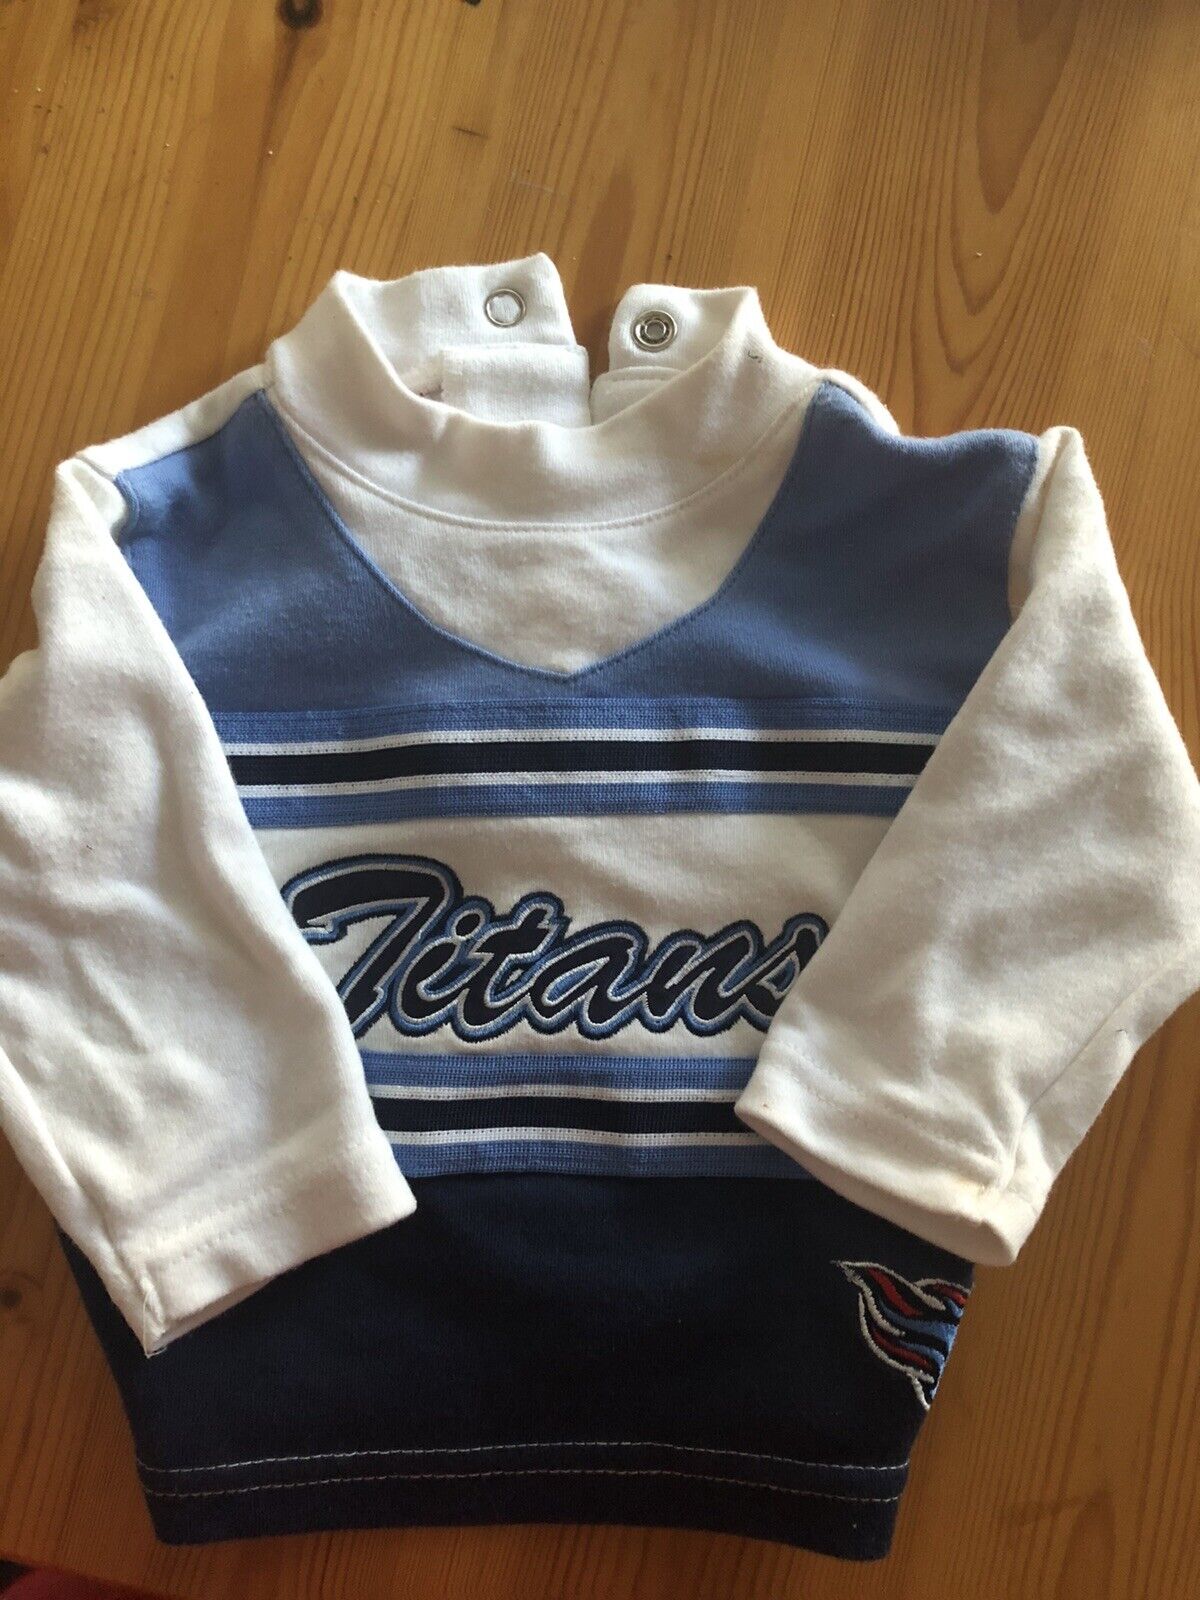 Tennessee Titans Infant Sweat Shirt TN Titans Baby Size 12 Months 12M